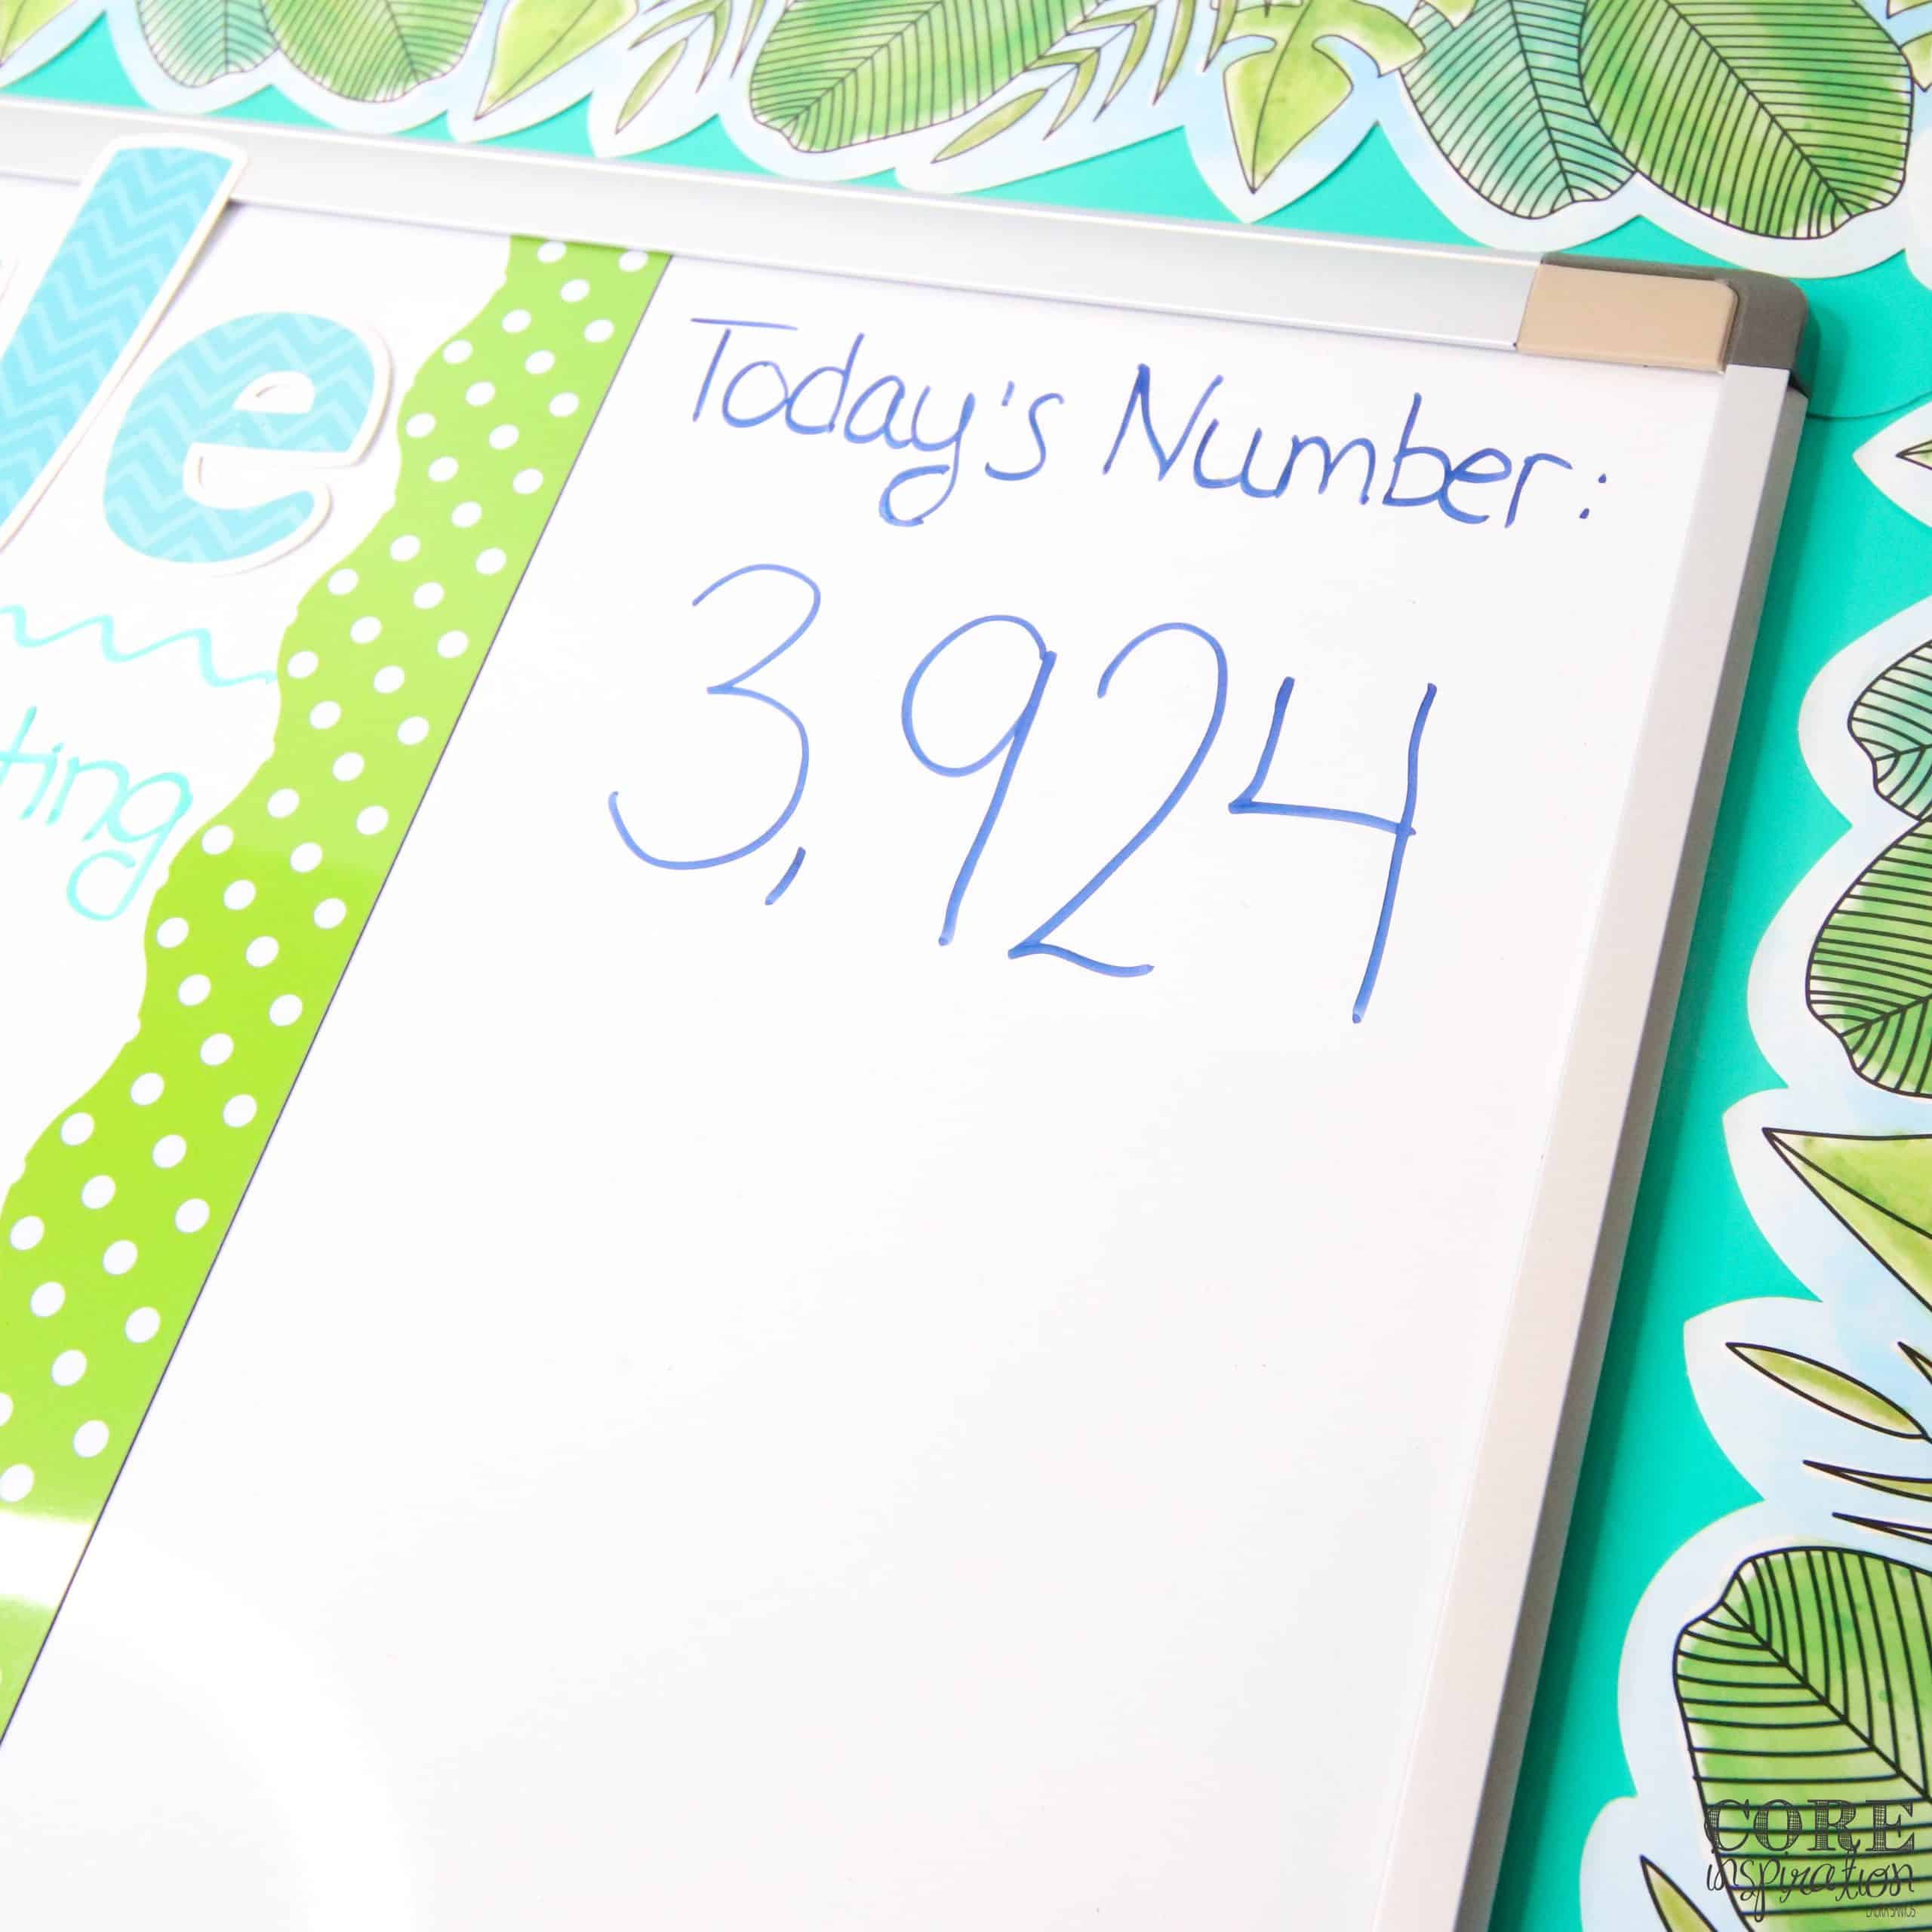 Today's number (3,924) written on classroom whiteboard next to the daily schedule.